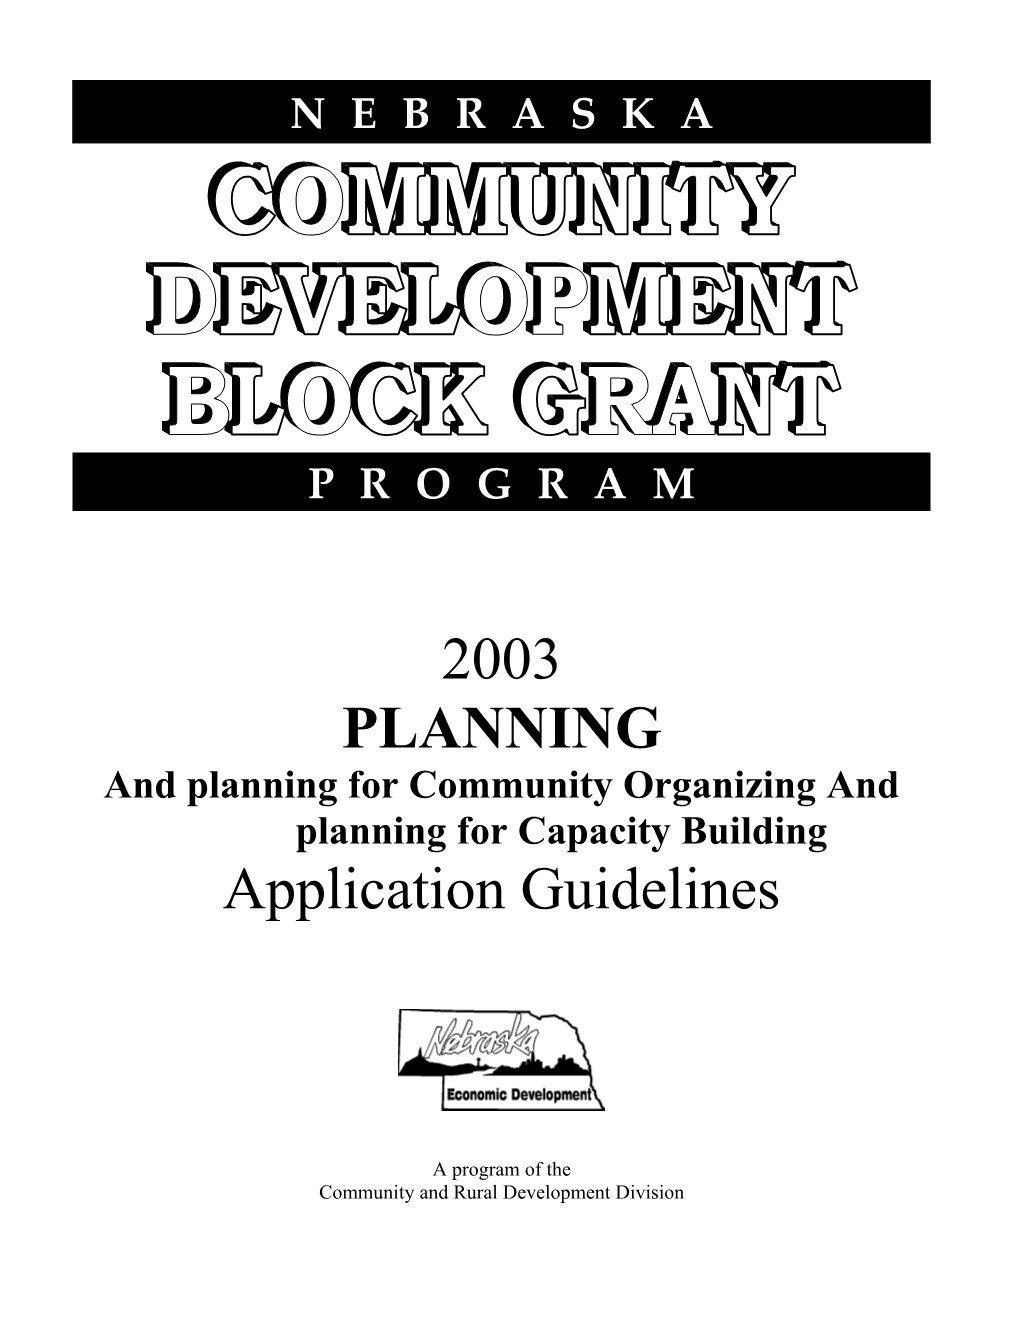 And Planning for Community Organizing and Planning for Capacity Building